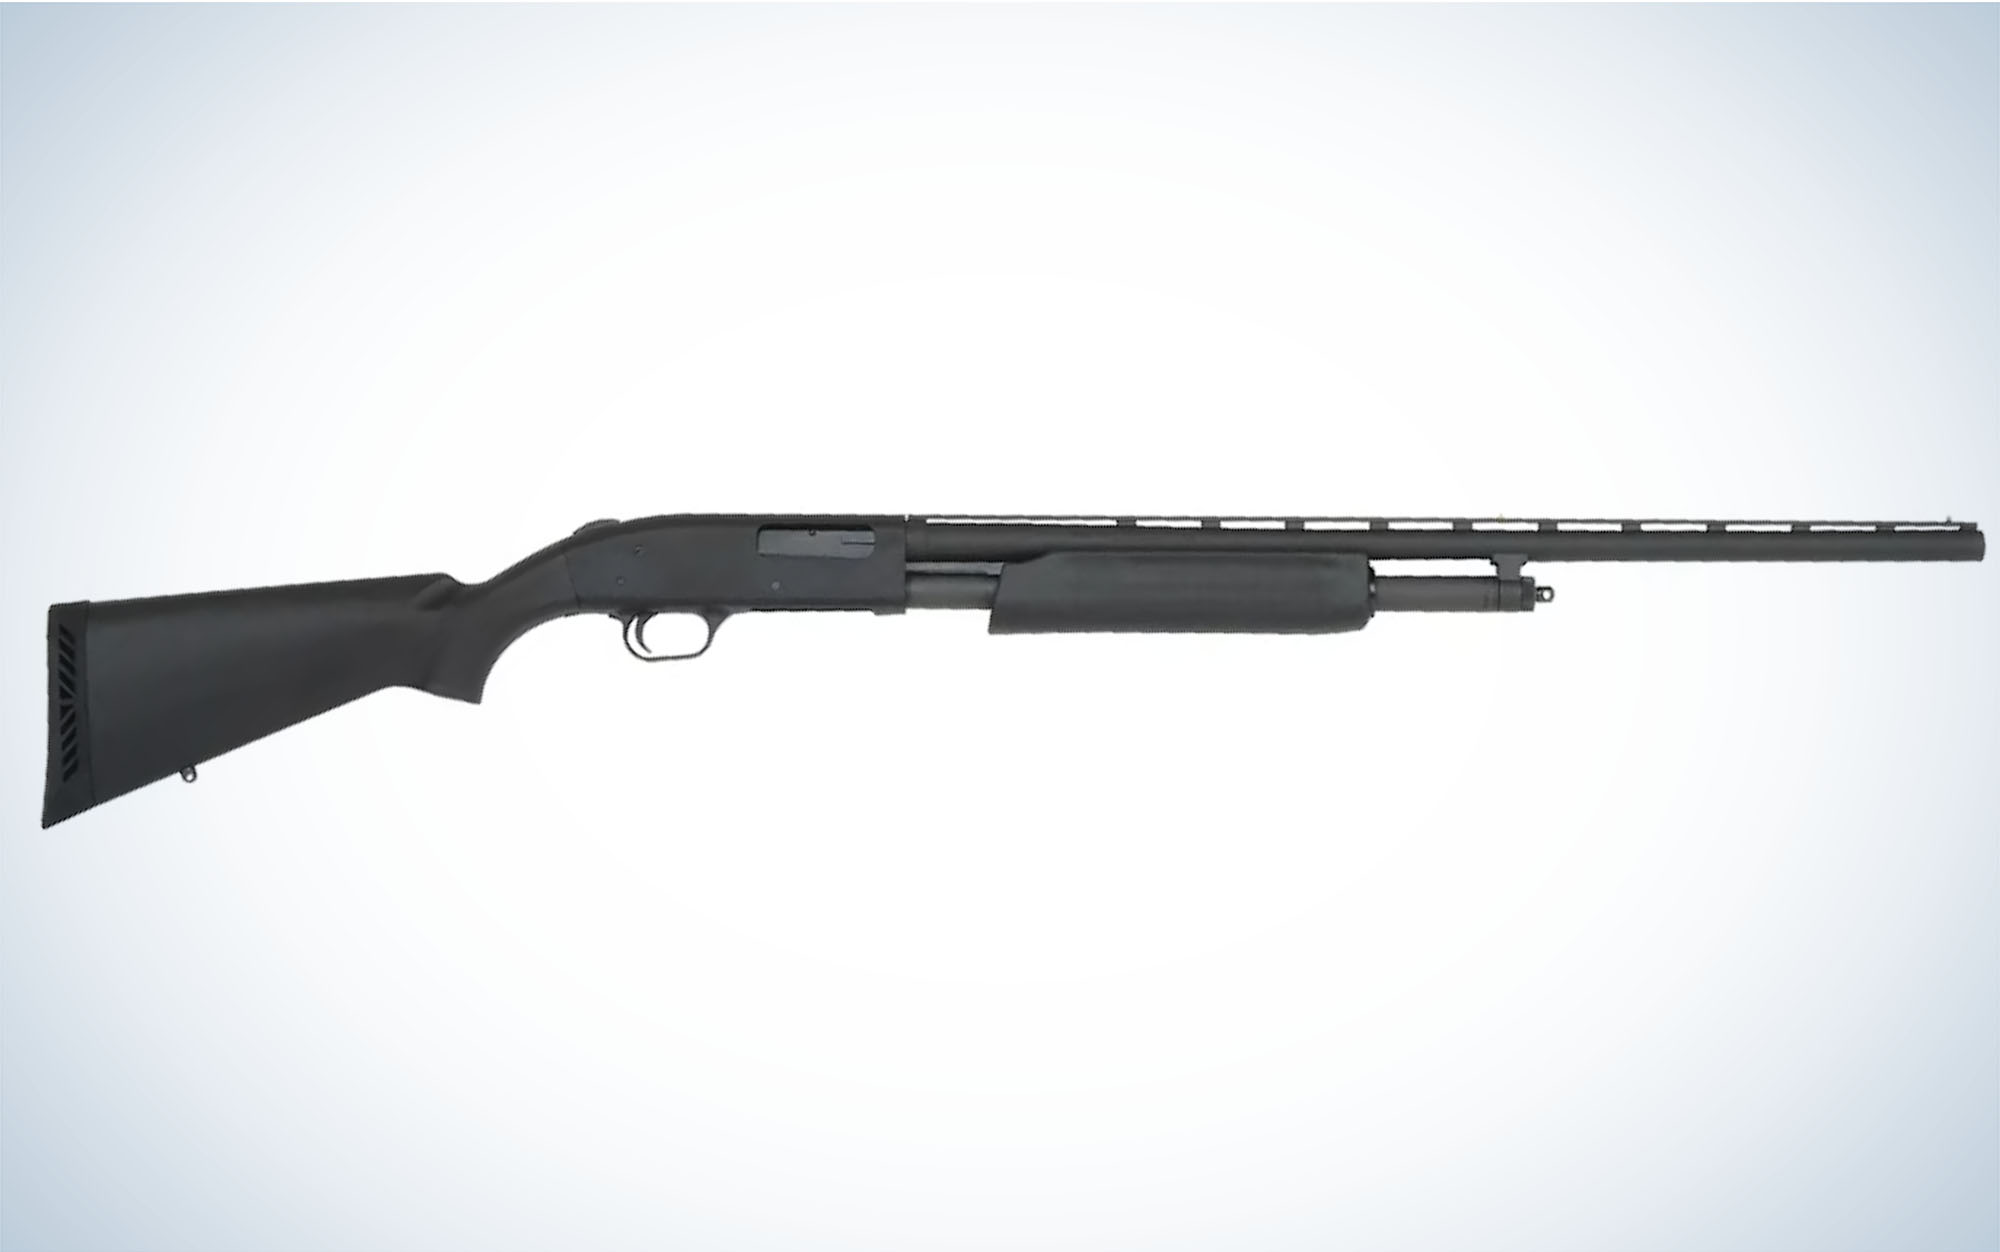 The Mossberg 500 could replace the Remington 870.